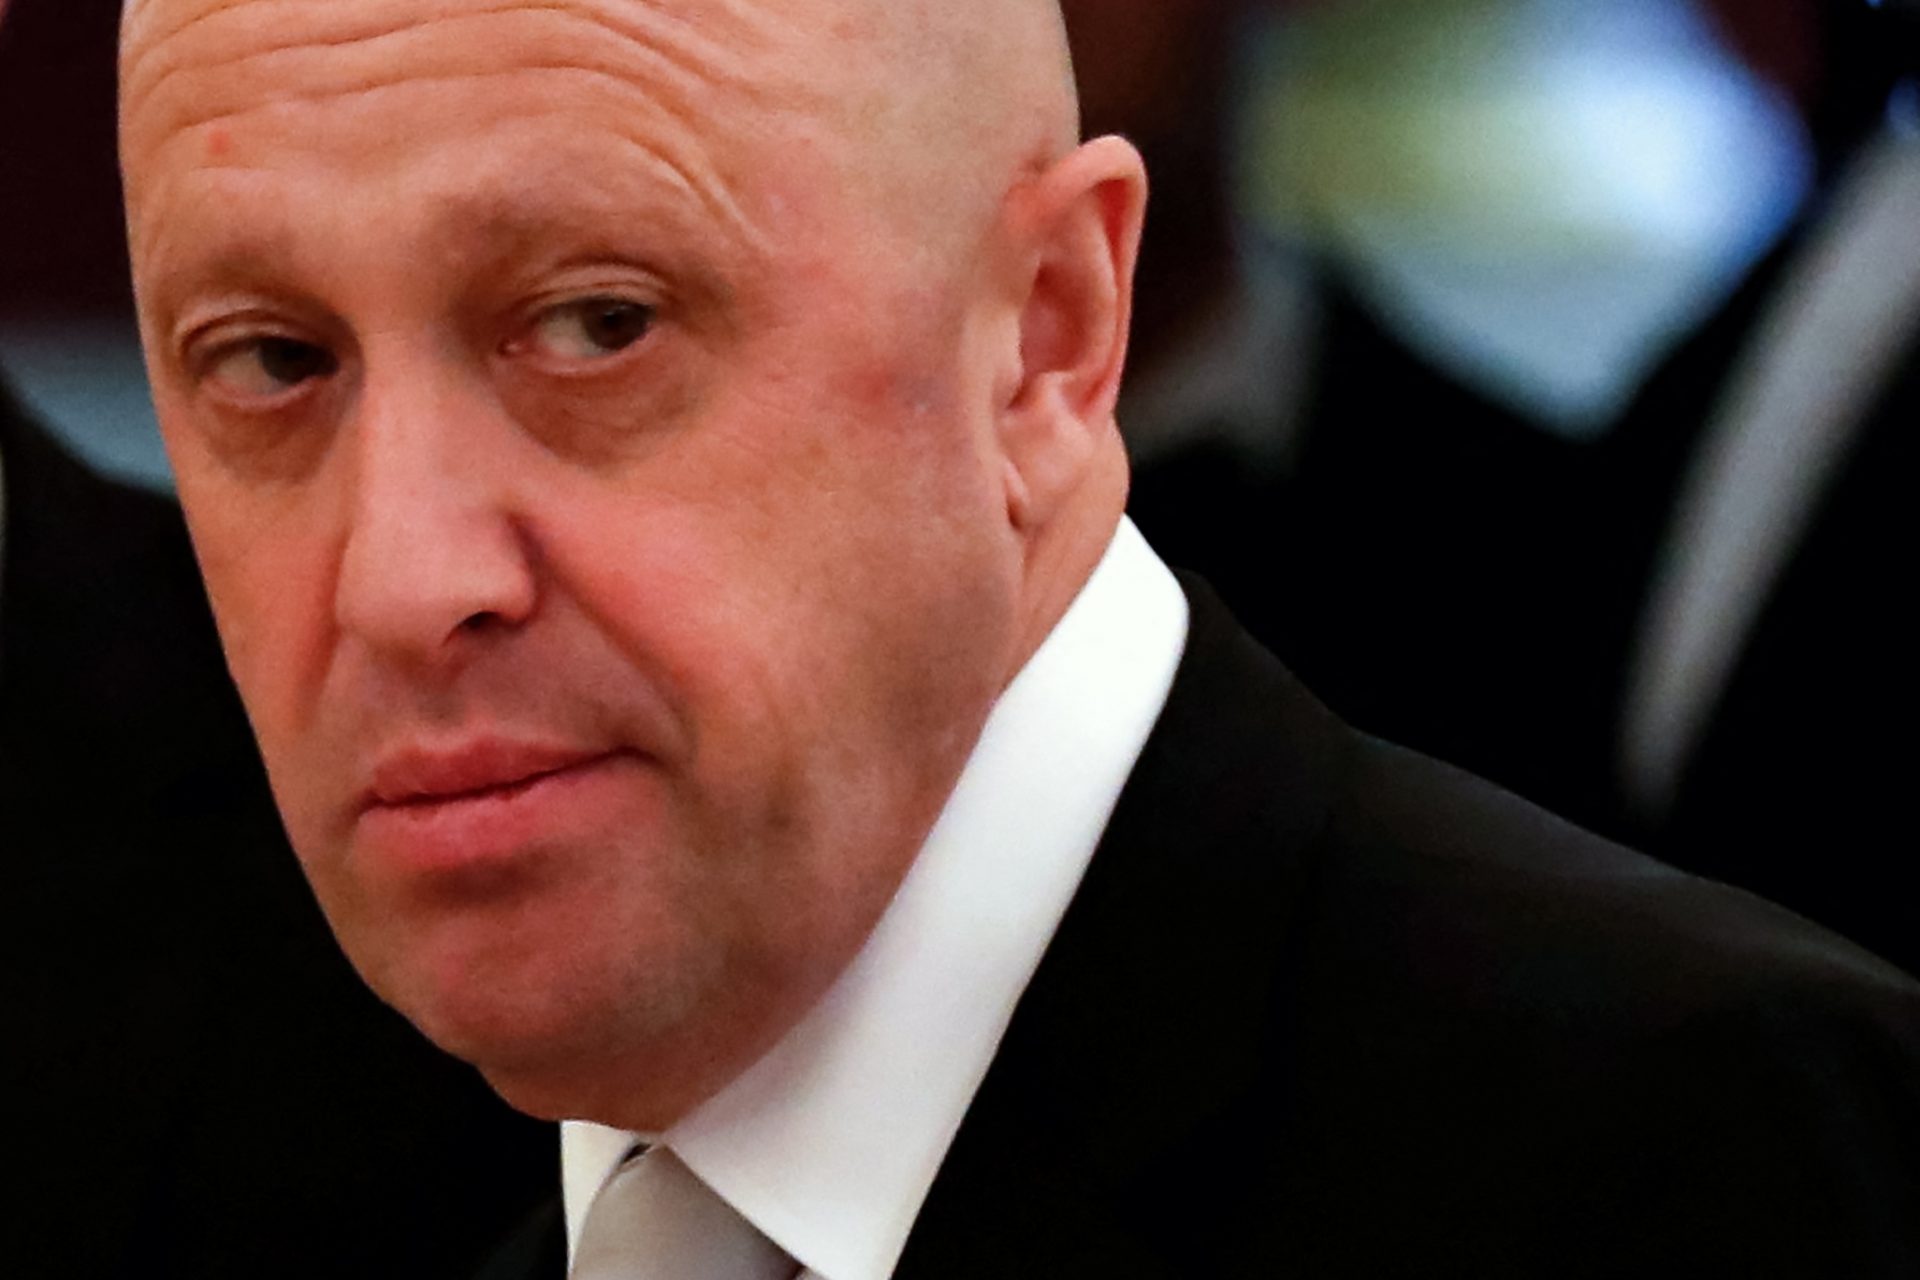 How close did Yevgeny Prigozhin come to acquiring nukes? 